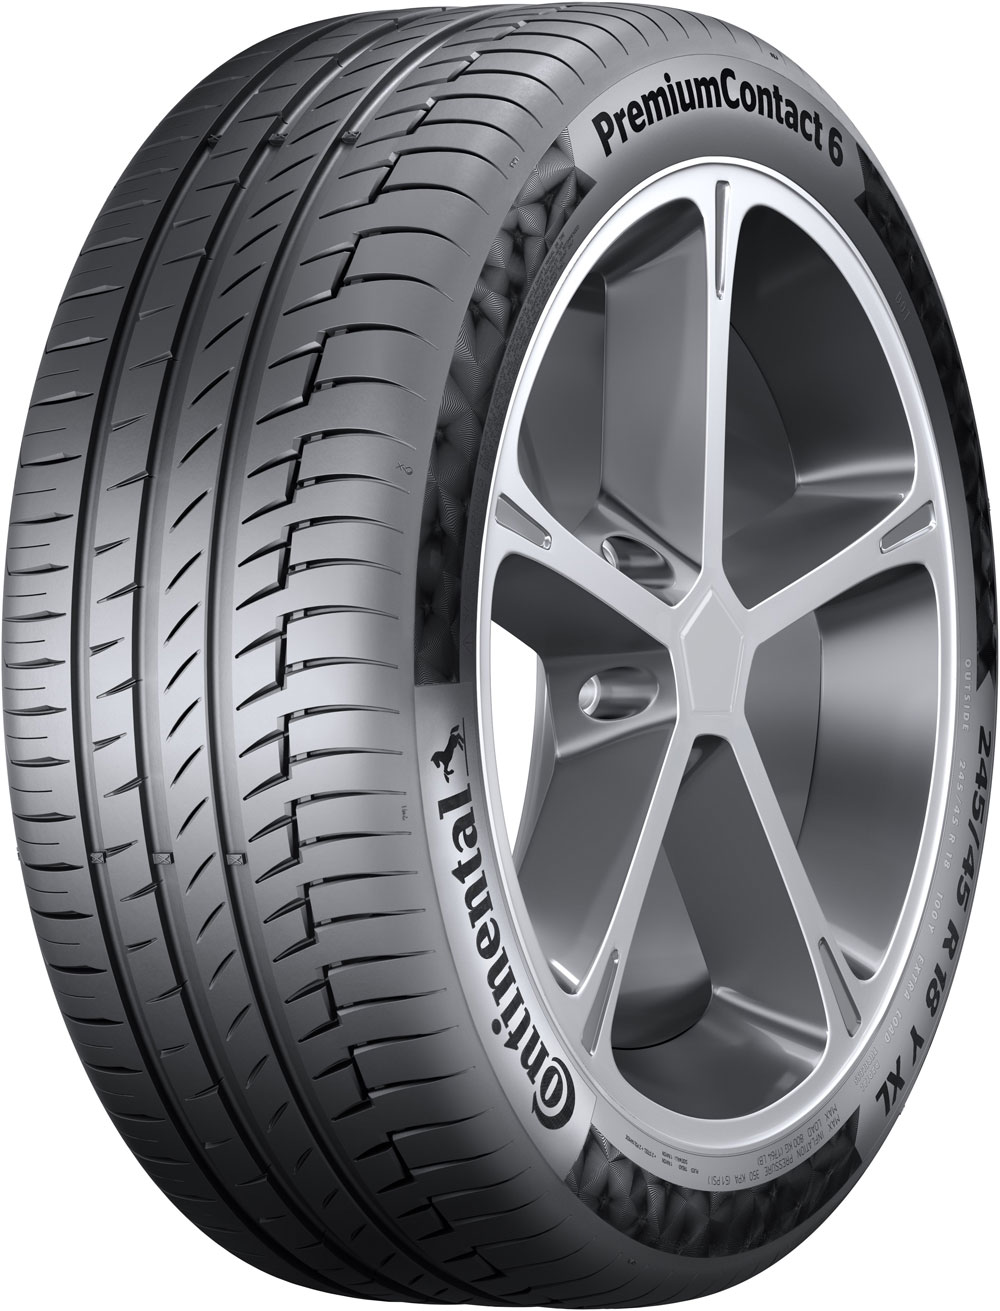 Anvelope auto CONTINENTAL PremiumContact 6 MO XL MERCEDES FP 285/45 R22 114